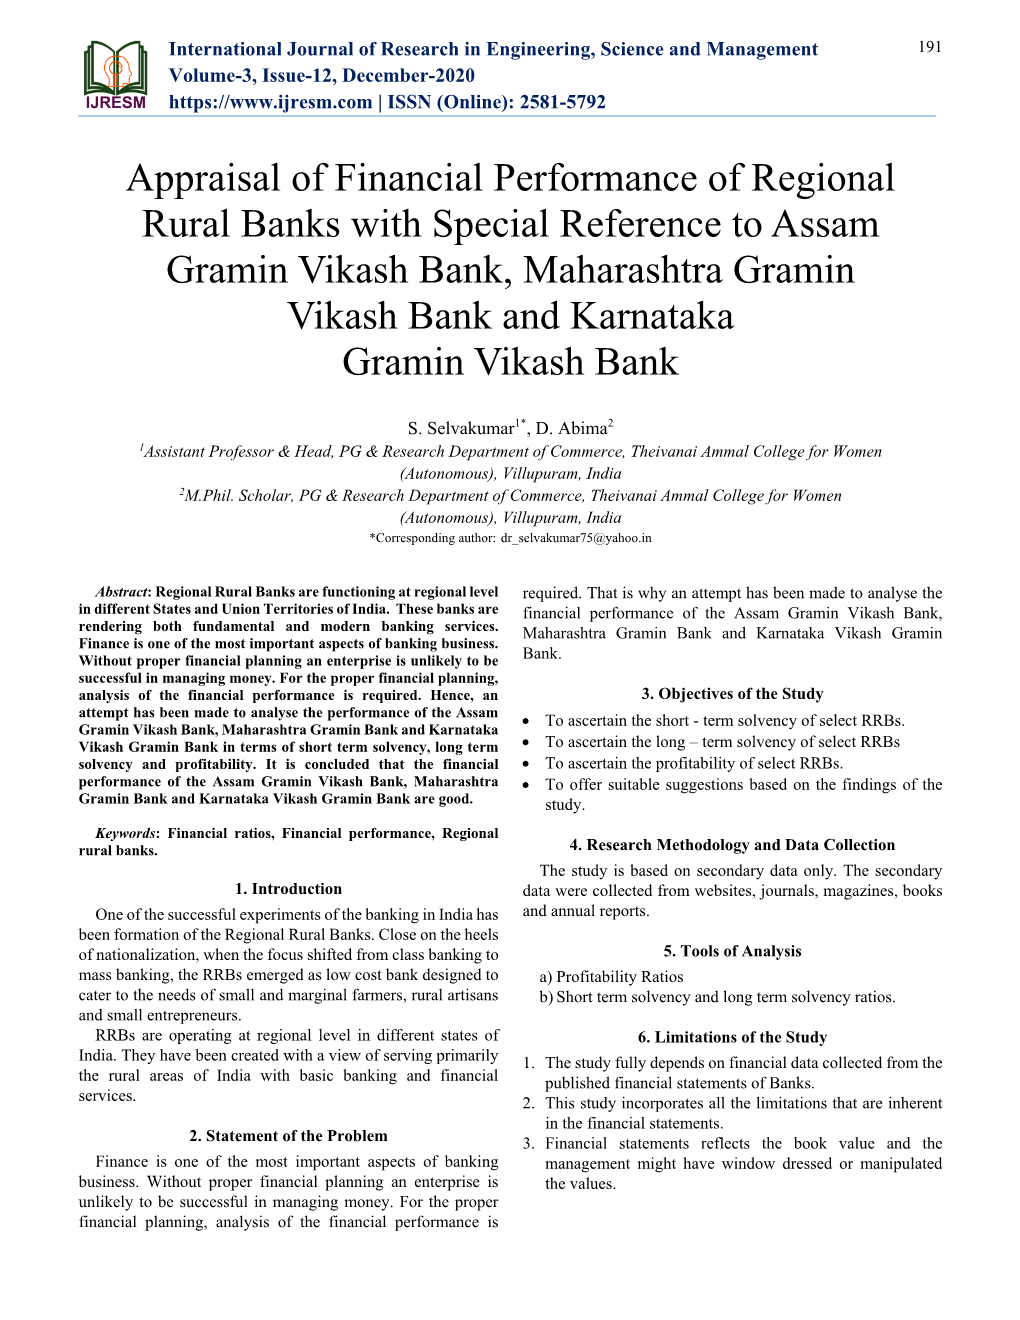 Appraisal of Financial Performance of Regional Rural Banks with Special